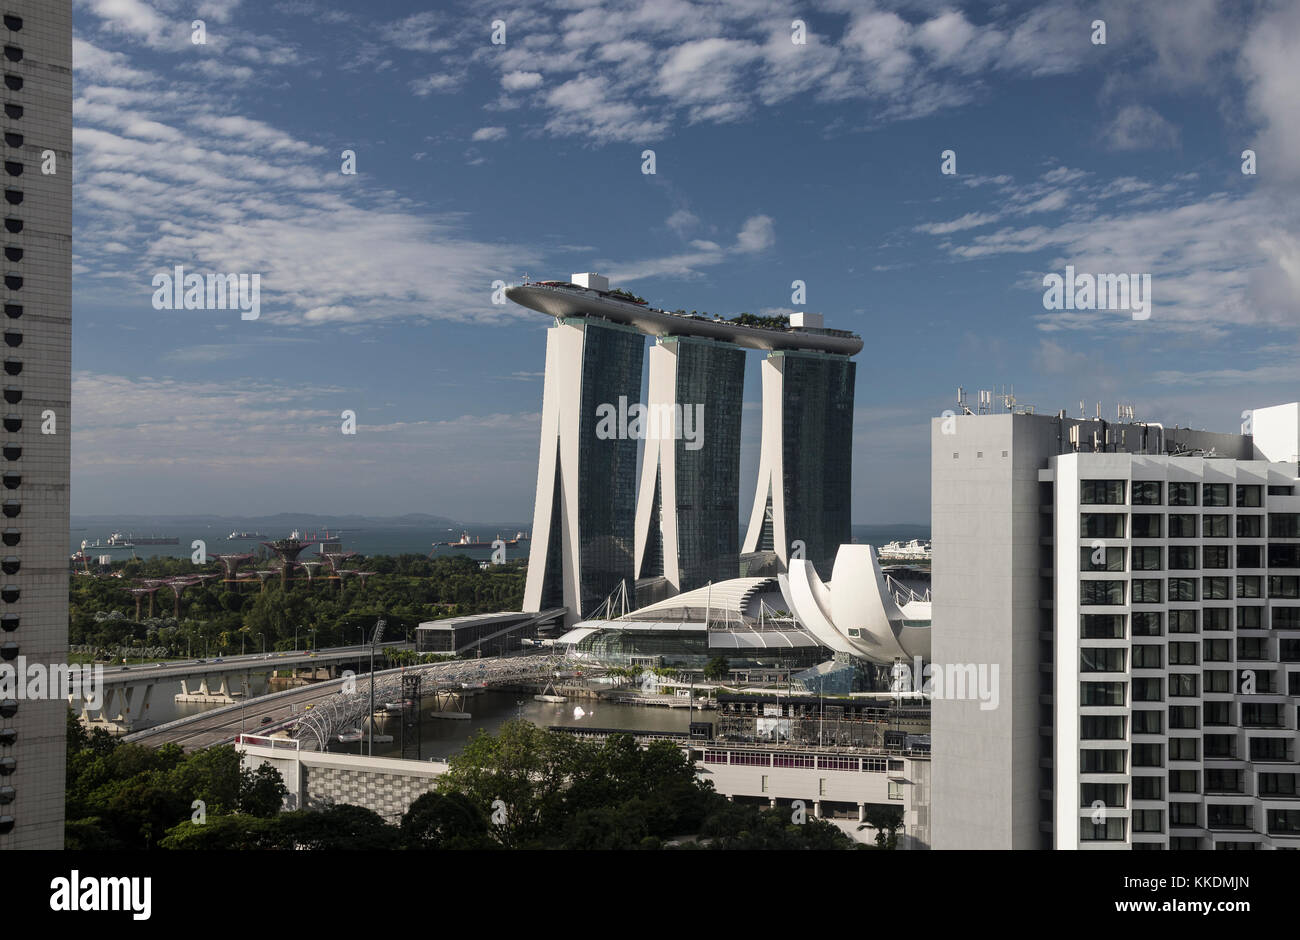 Daytime shot of  the Marina Bay area in Singapore, taken from the Pan Pacific Hotel showing the Marina Bay Sands Hotel Stock Photo